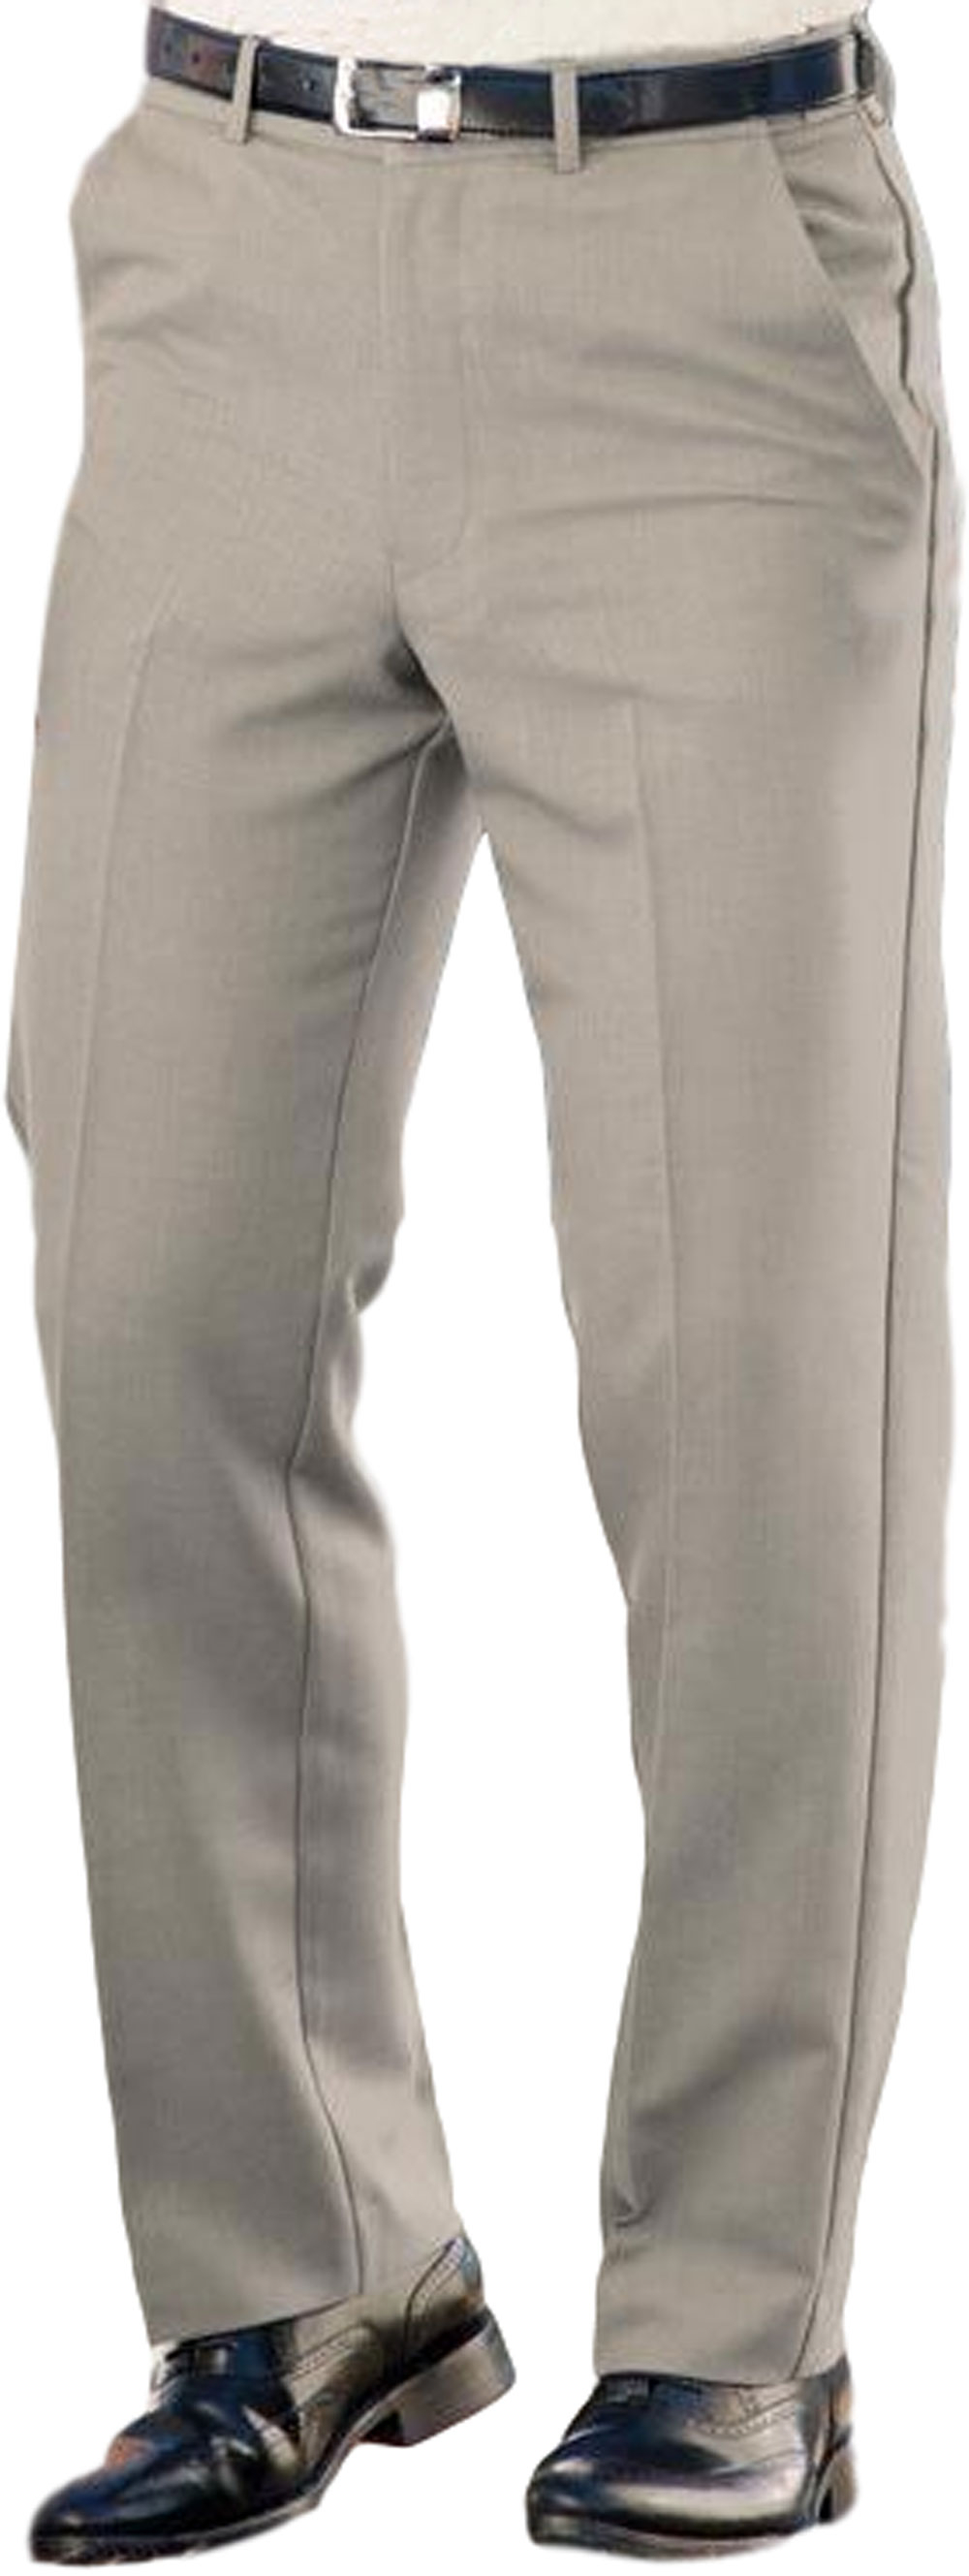 Farah Flexi Waist Trouser for Men Waist sizes from 46 inch to 64 inches  Chatleys | eBay